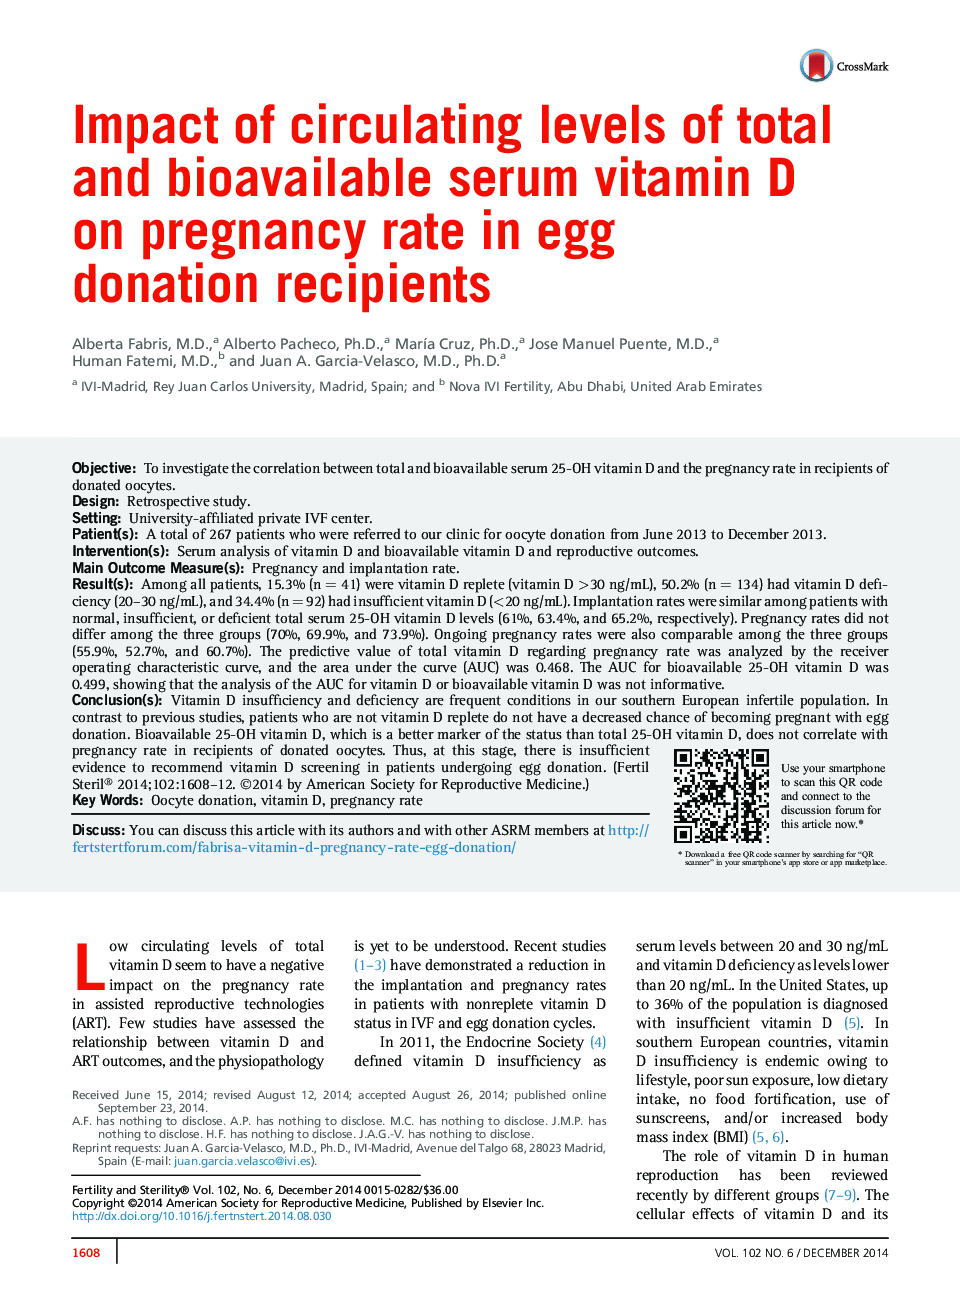 Impact of circulating levels of total and bioavailable serum vitamin D onÂ pregnancy rate in egg donation recipients